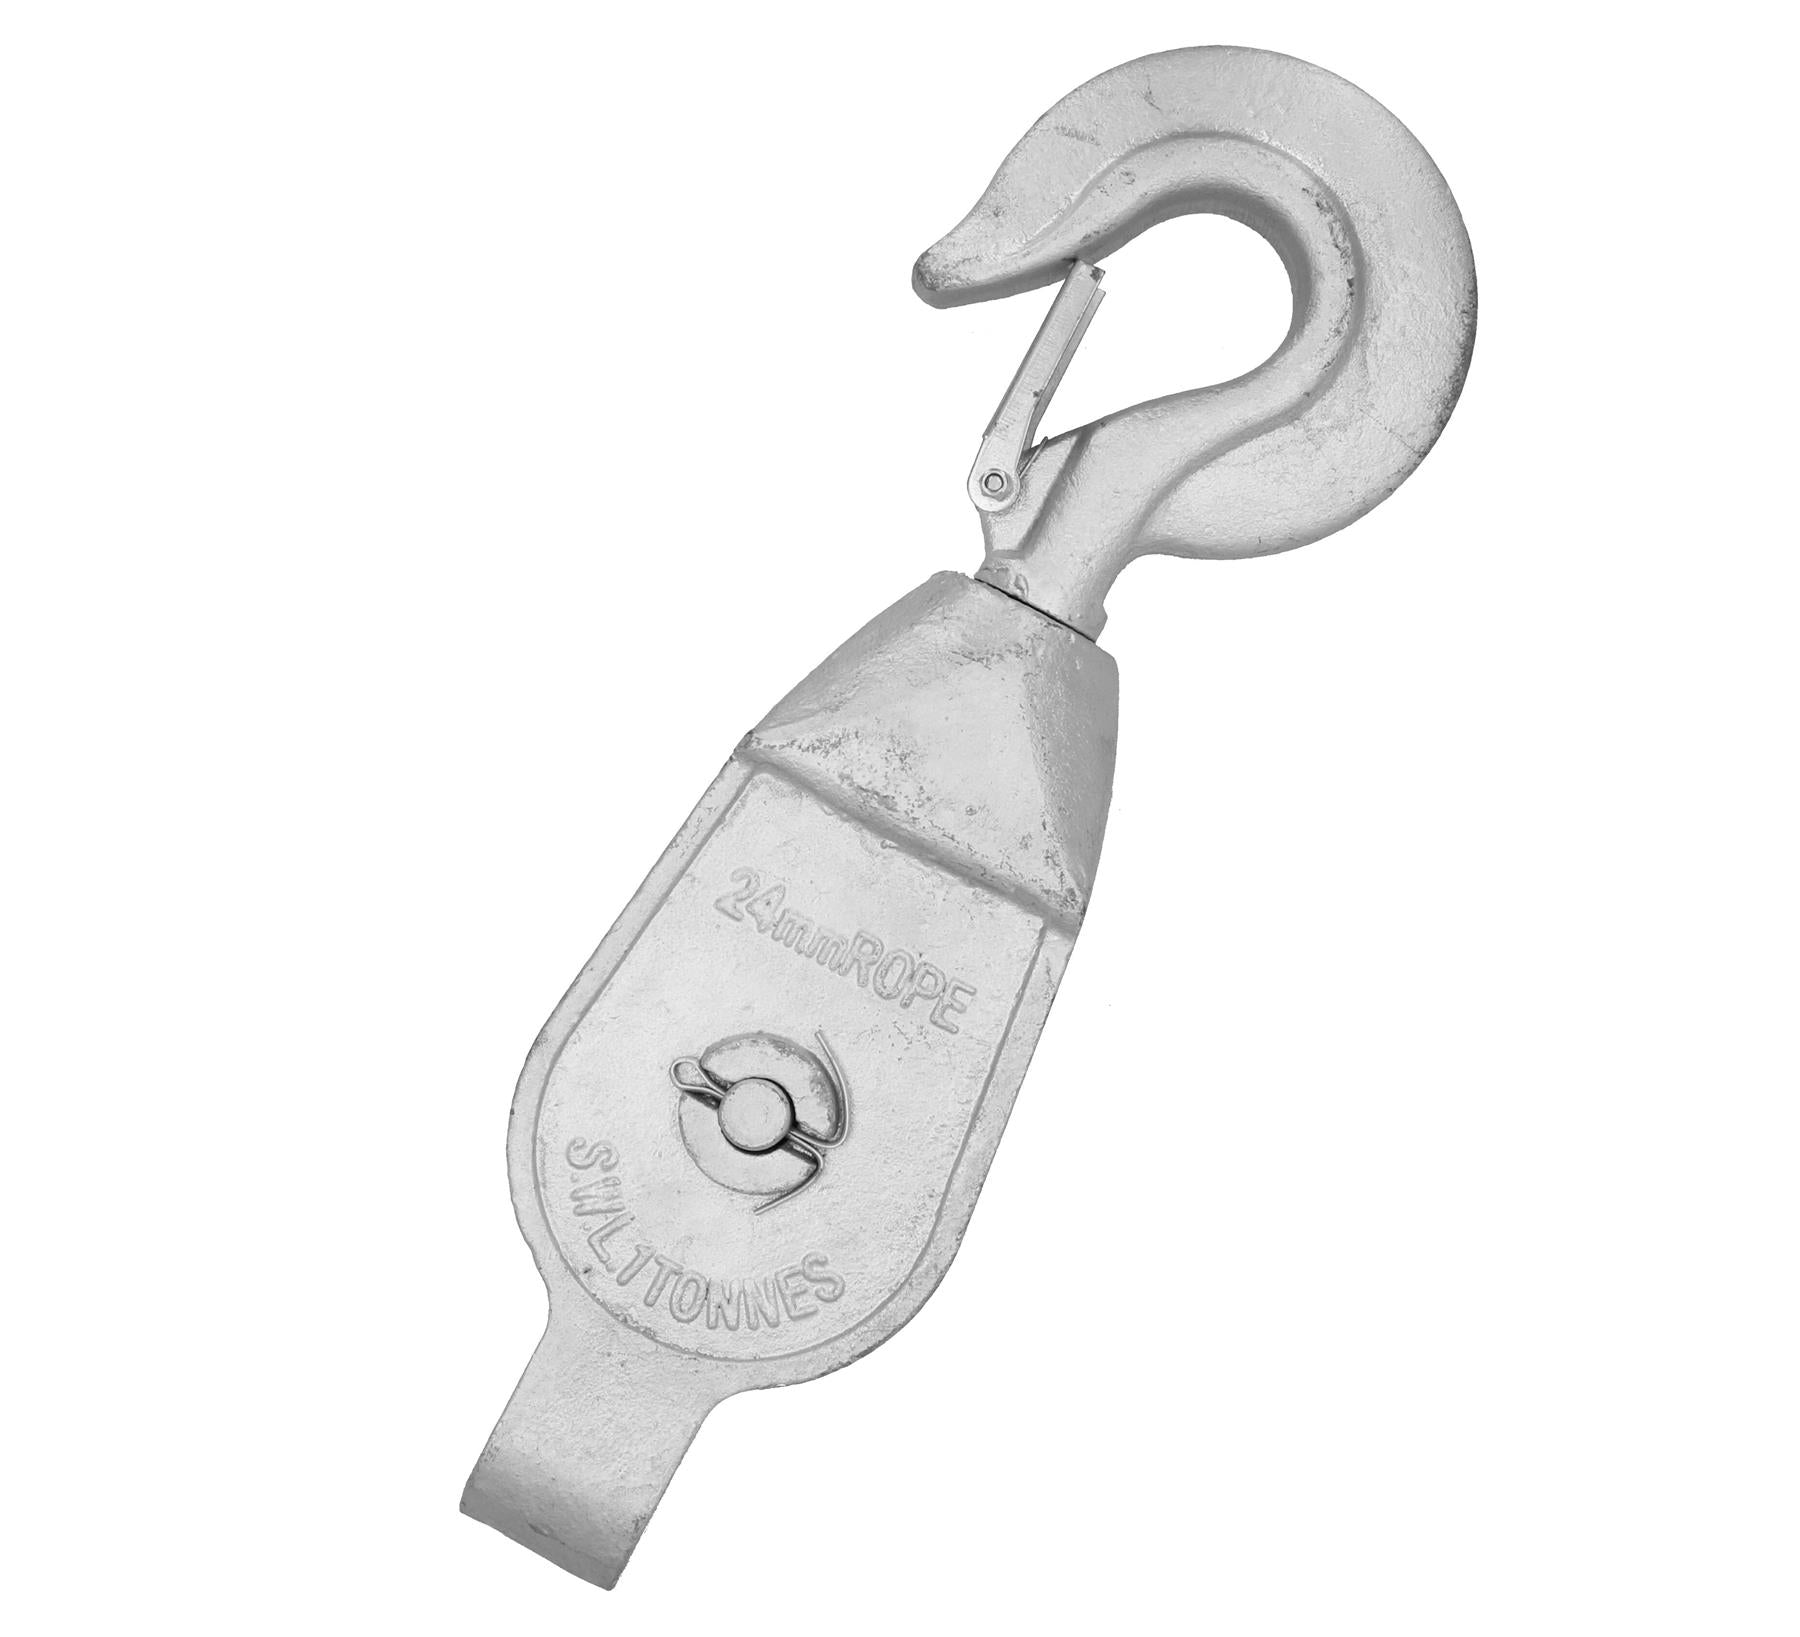 1.0T S.W.L. Pulley Block with Swivel Hook Galvanised 24mm Rope